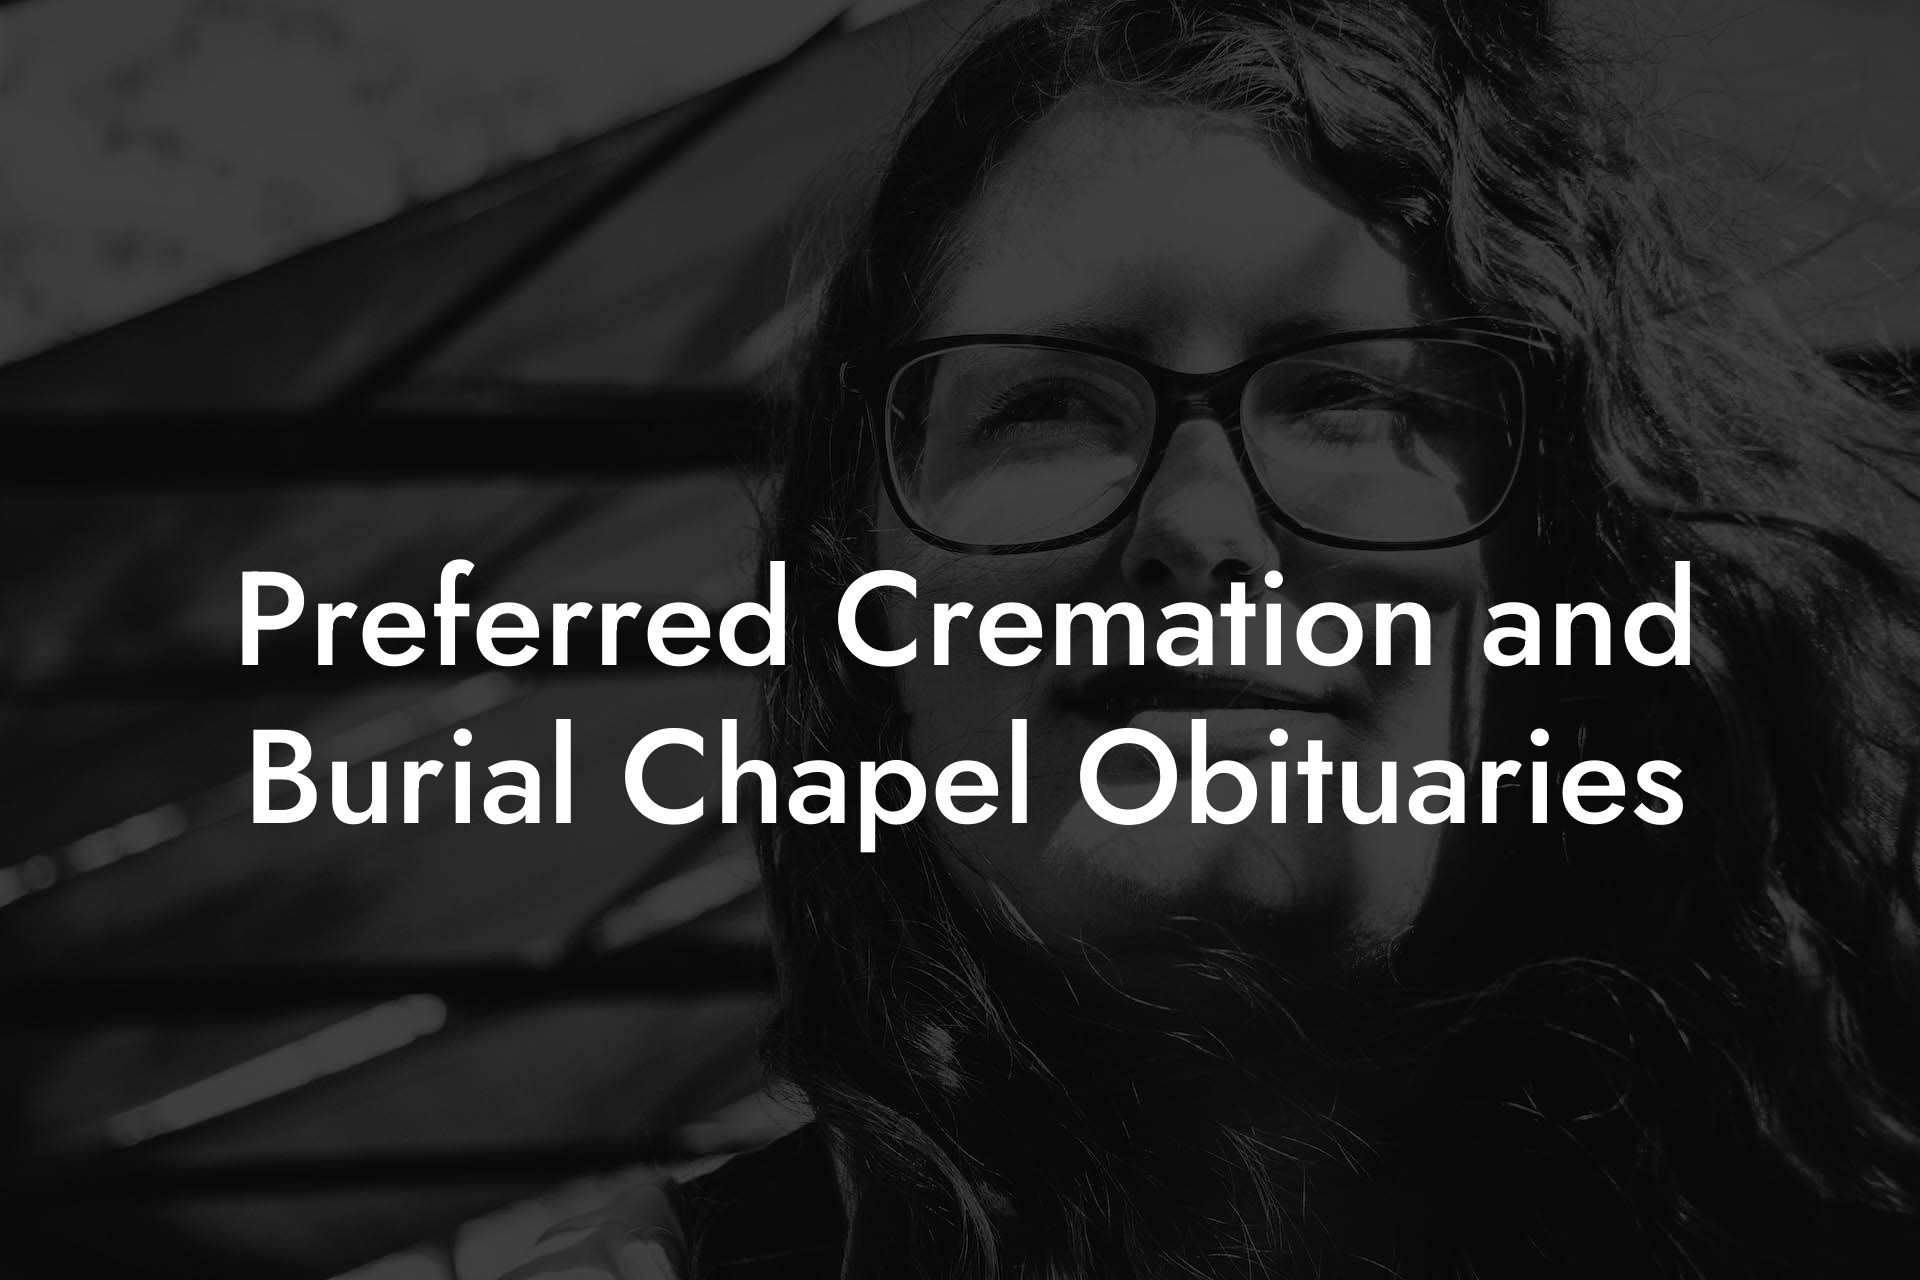 Preferred Cremation and Burial Chapel Obituaries